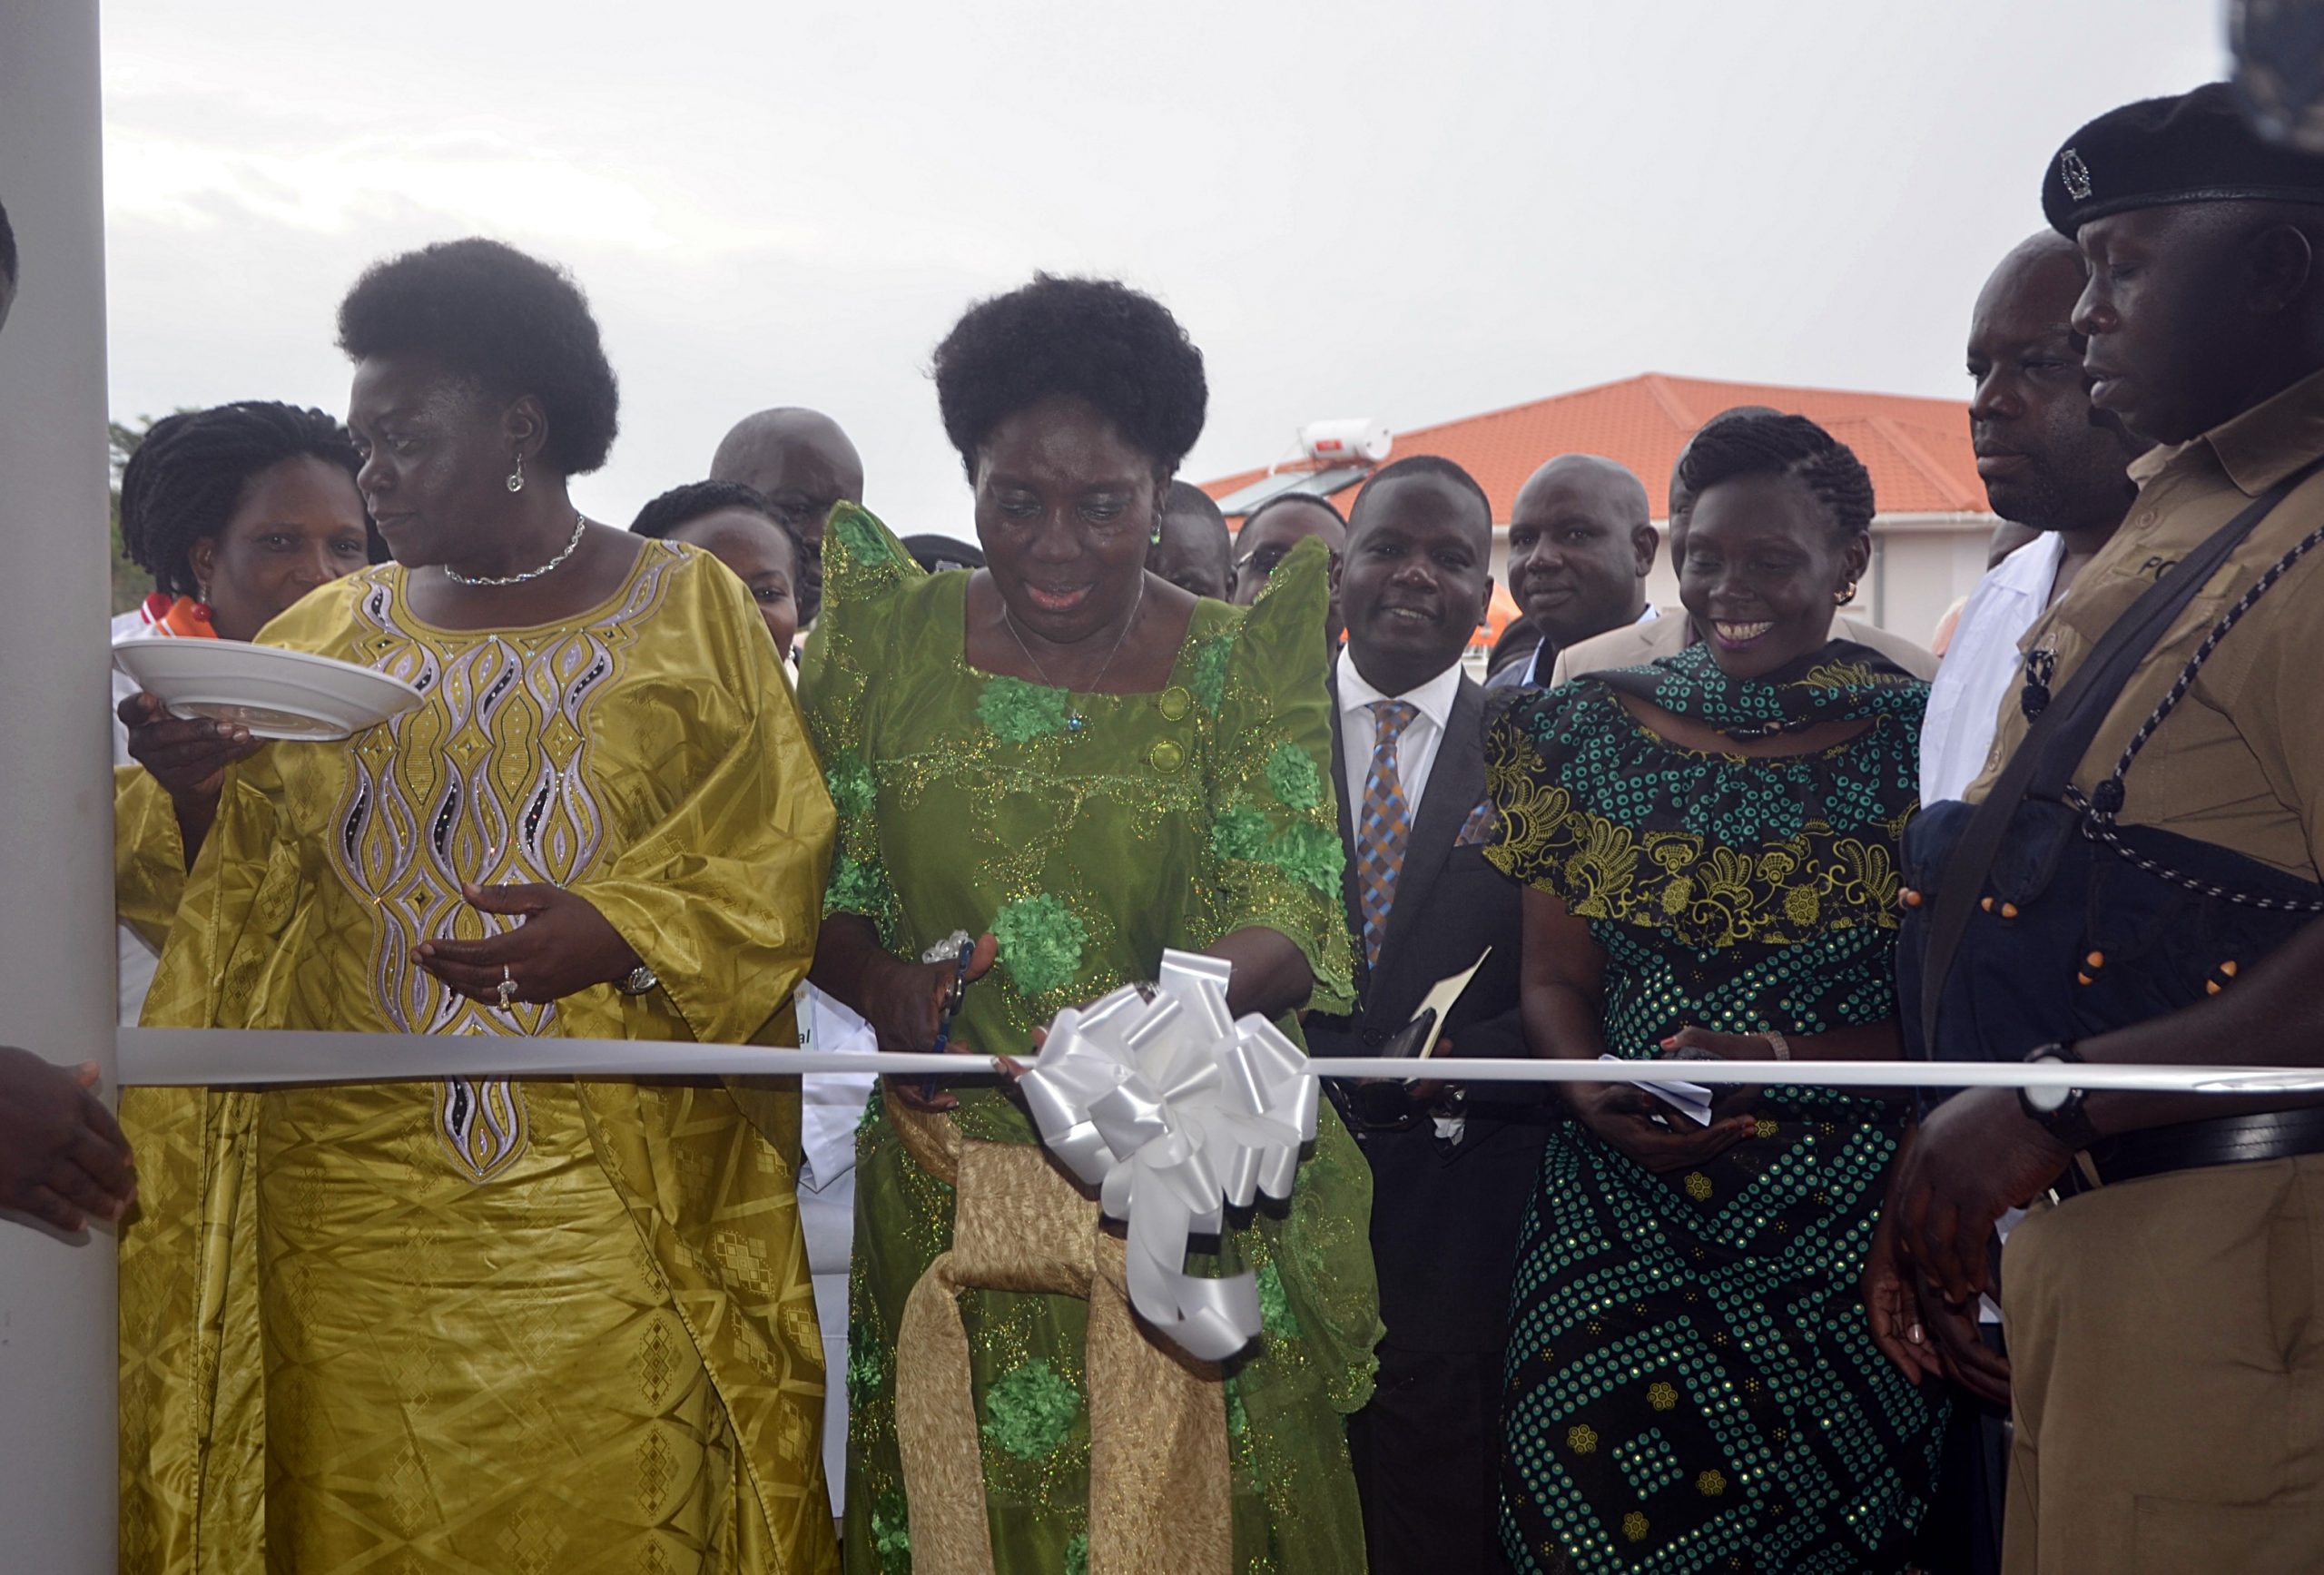 The Speaker of parlaiment, Hon. Rebecca Alitwala Kadaga (Middle) cuts the tape during the launch of TERREWODE on August 16, 2019